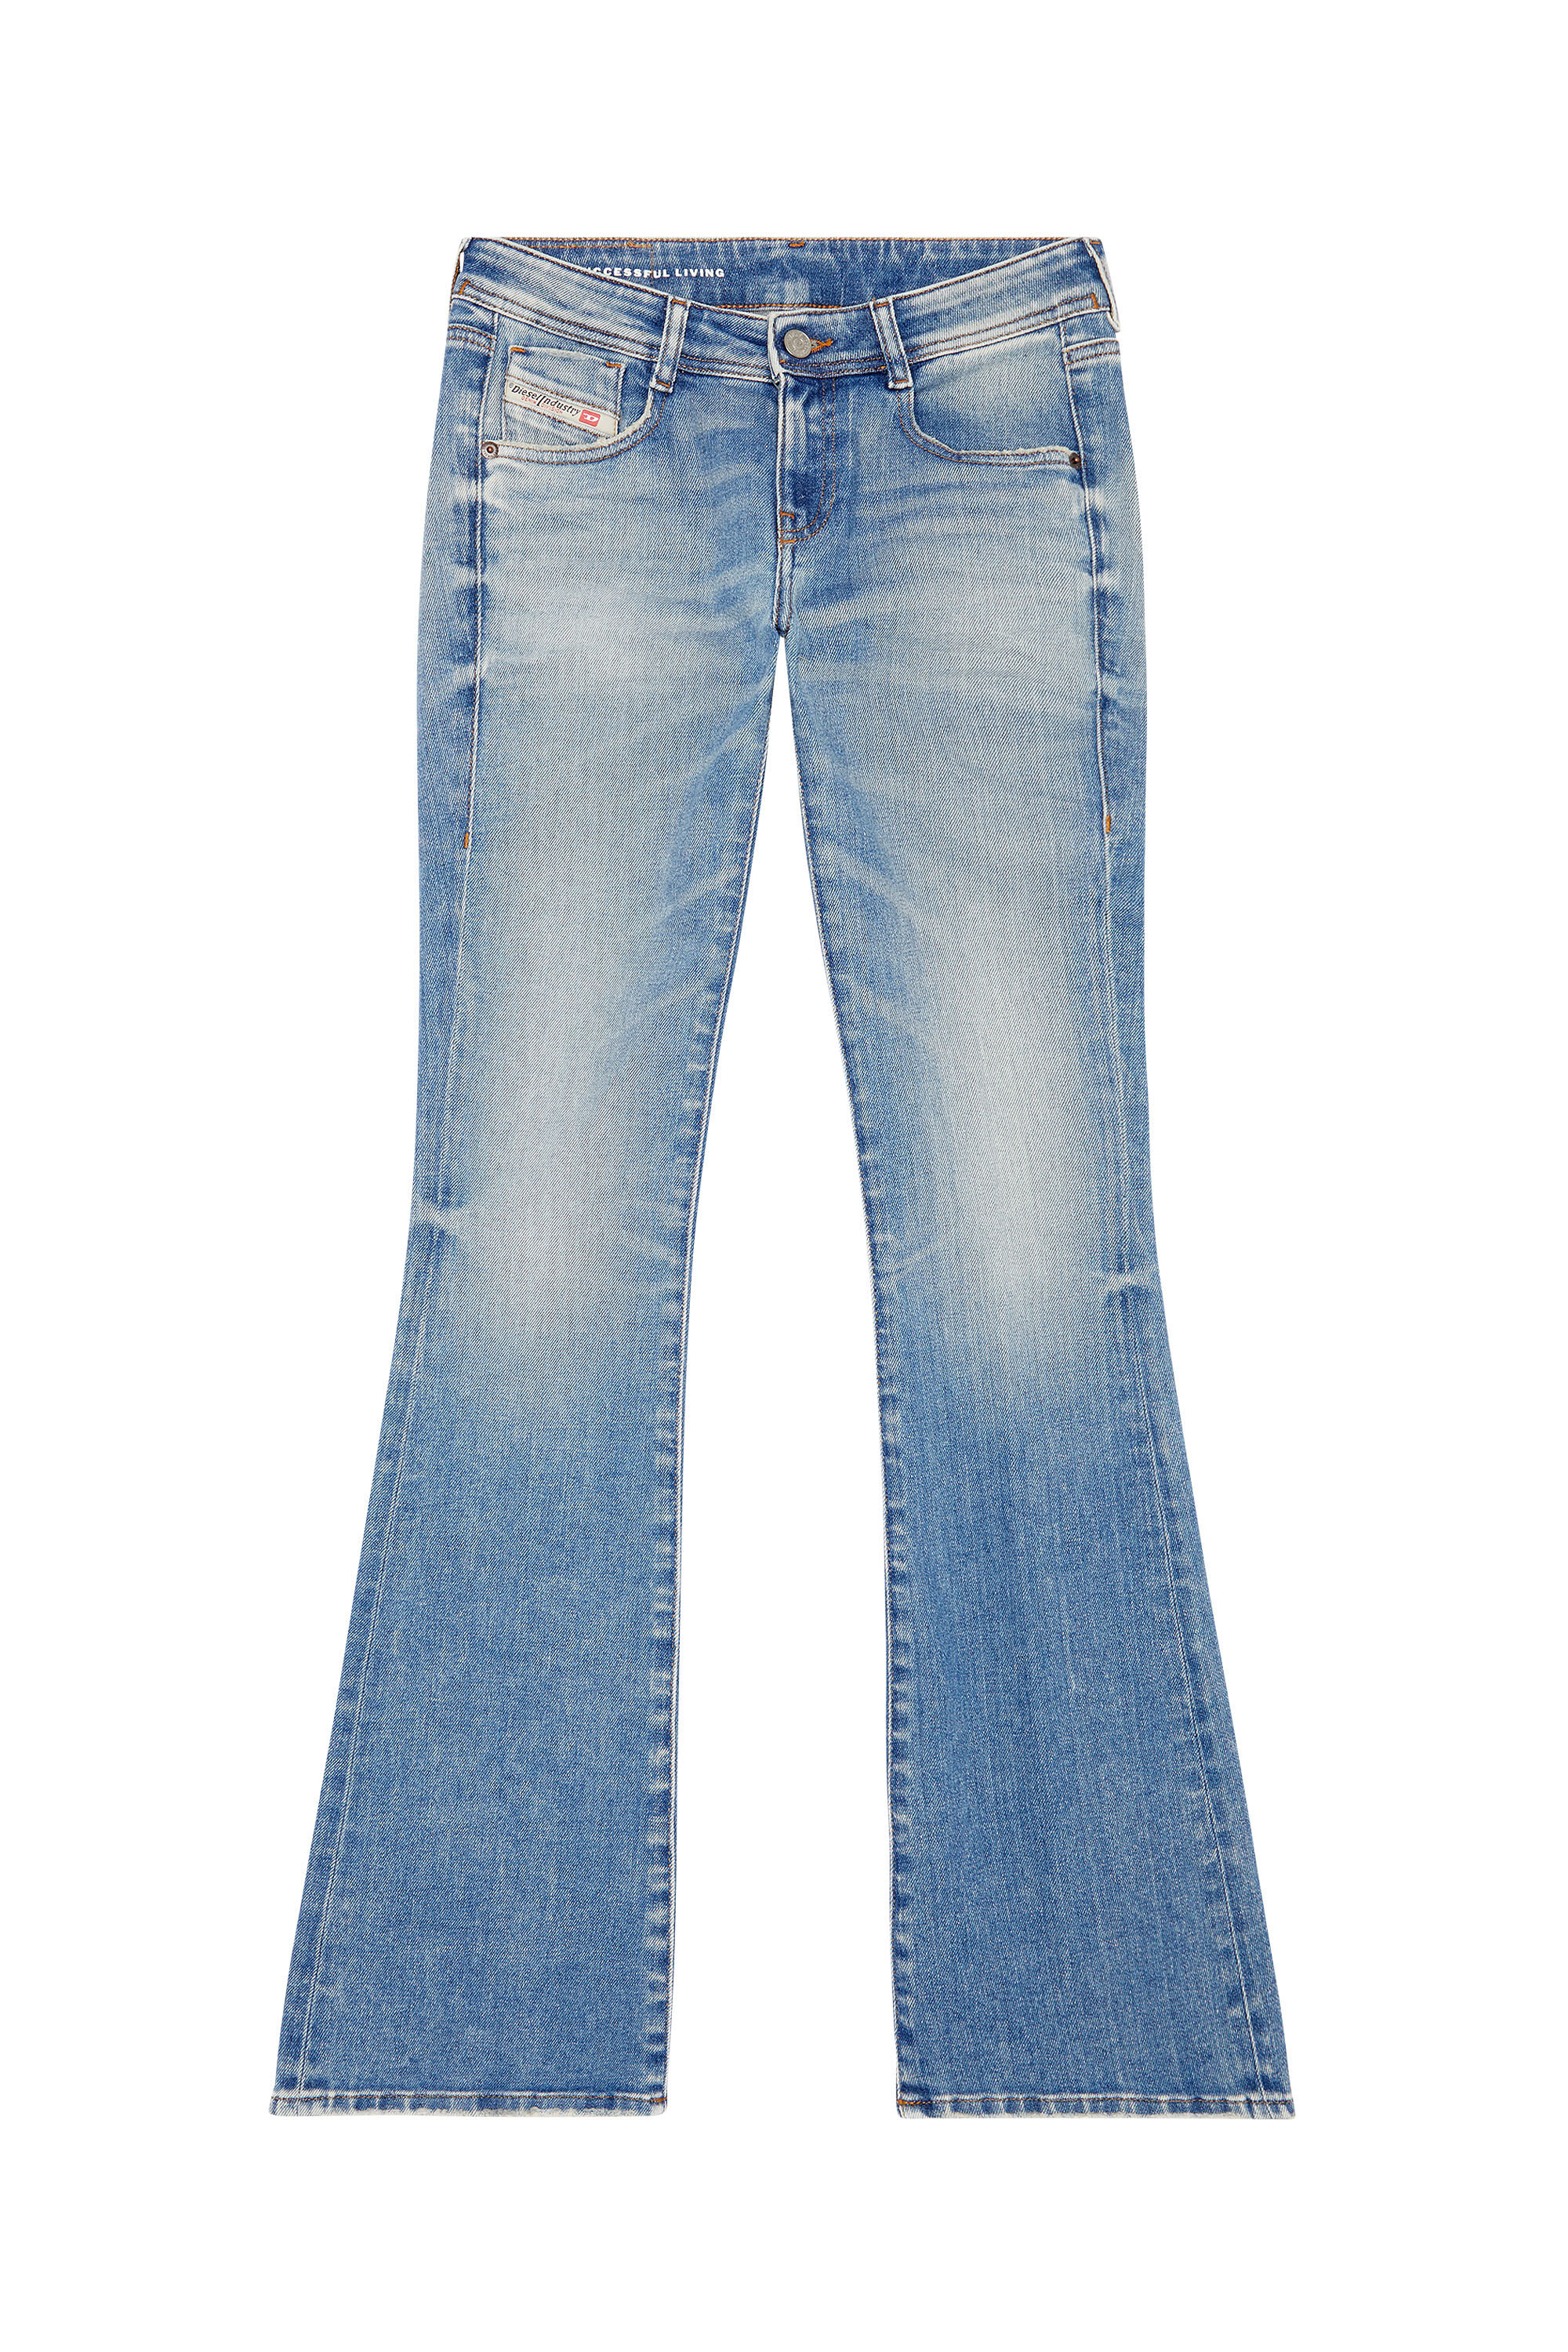 Women's Bootcut and Flare Jeans, Light blue